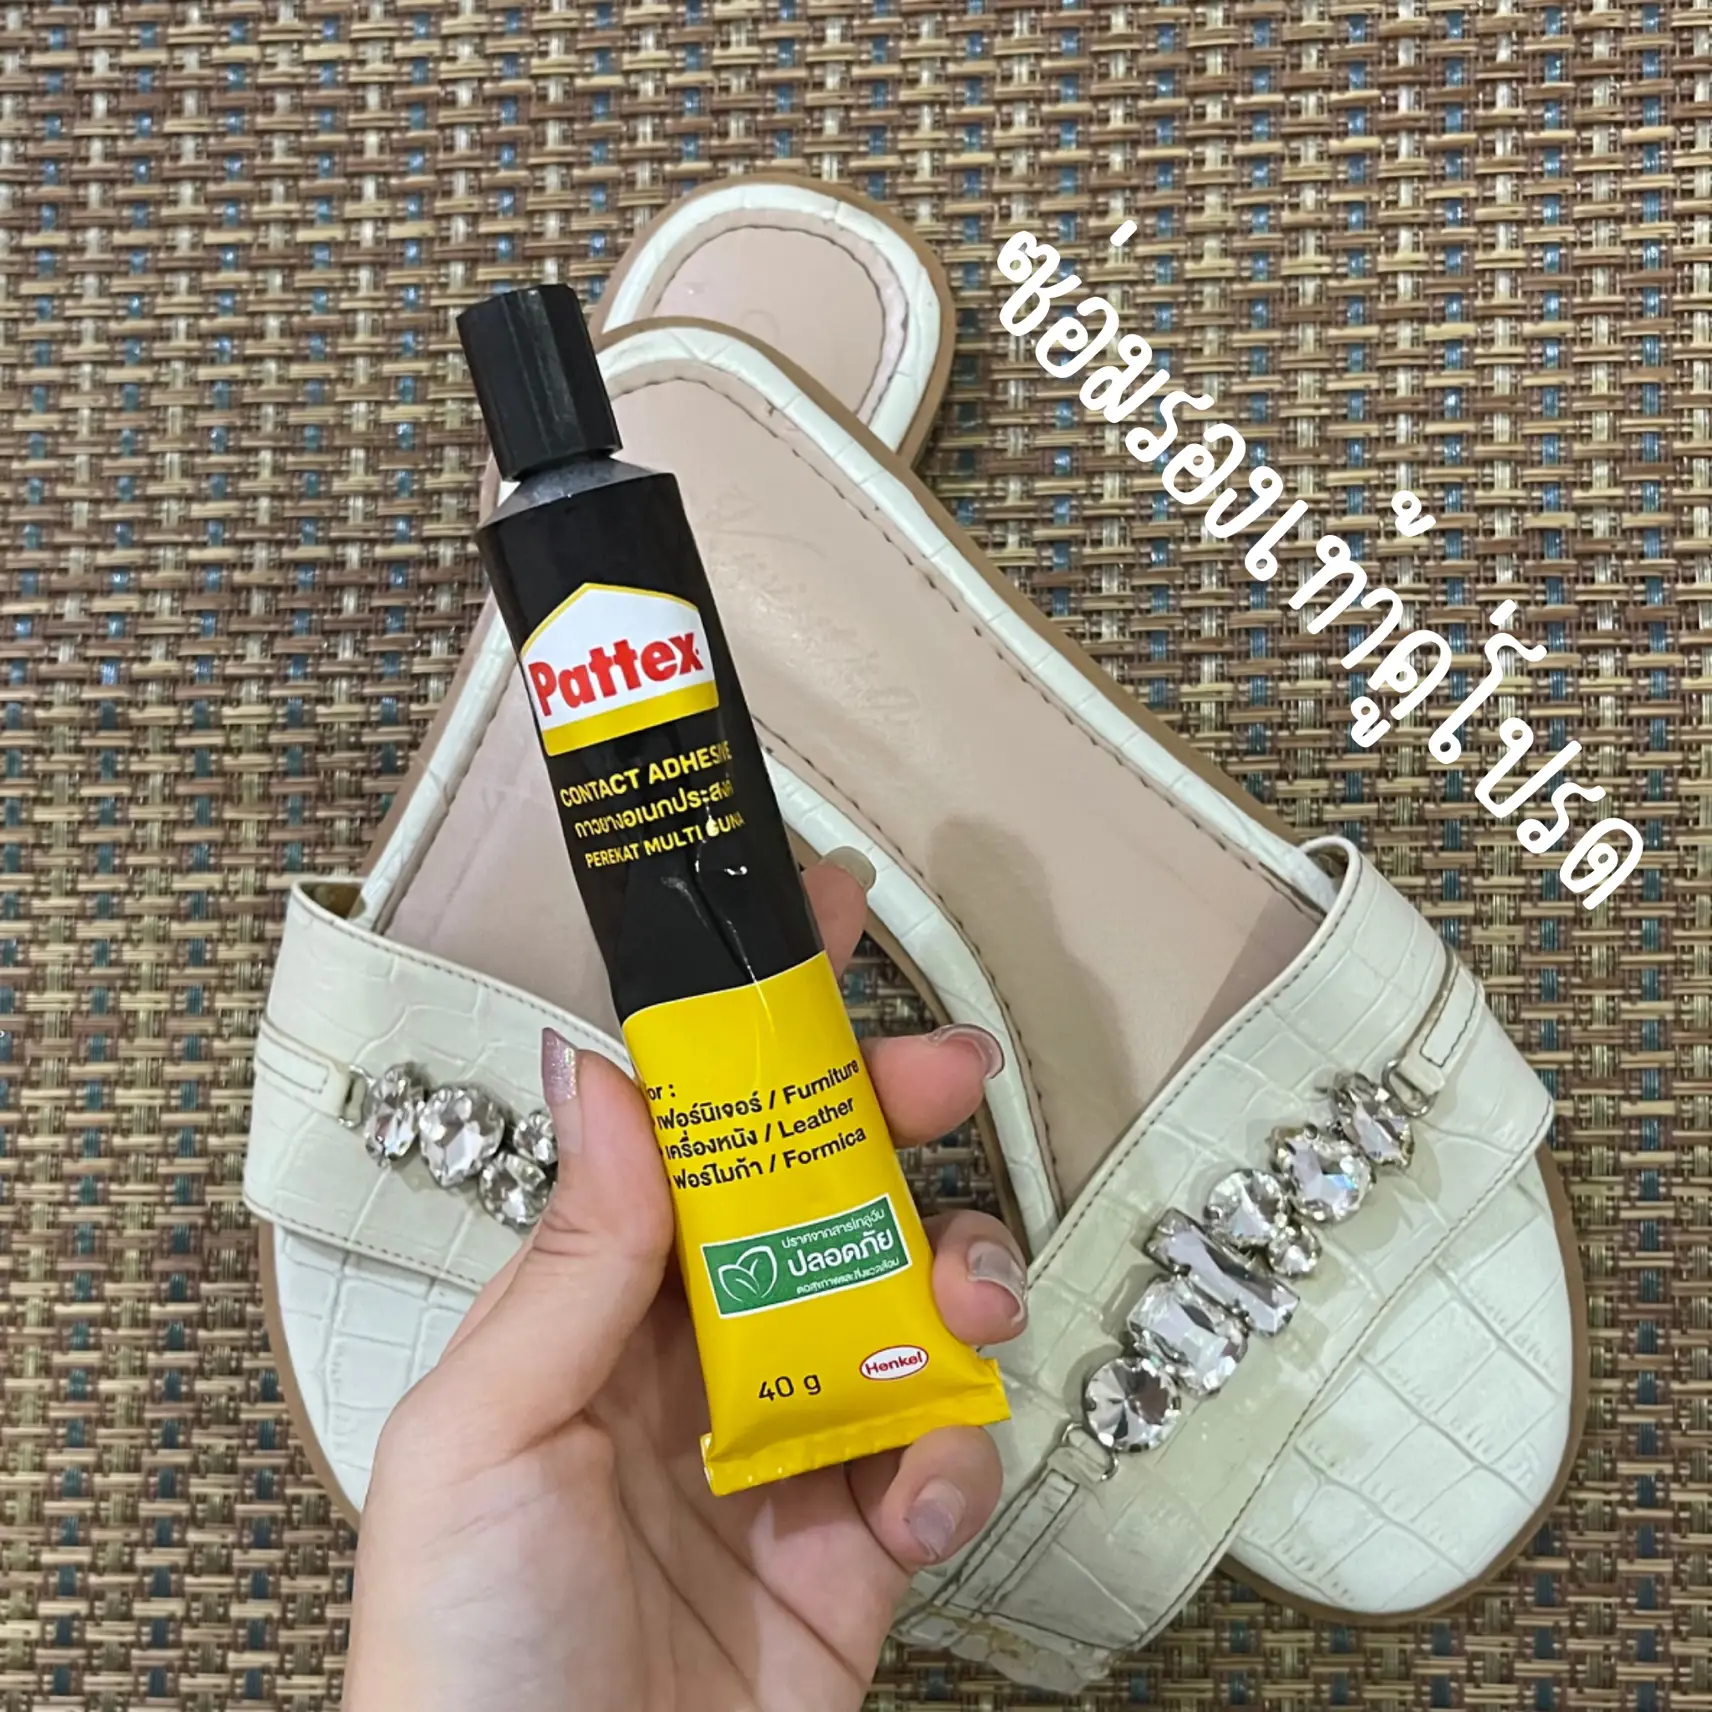 Pattex Leather Contact Adhesive